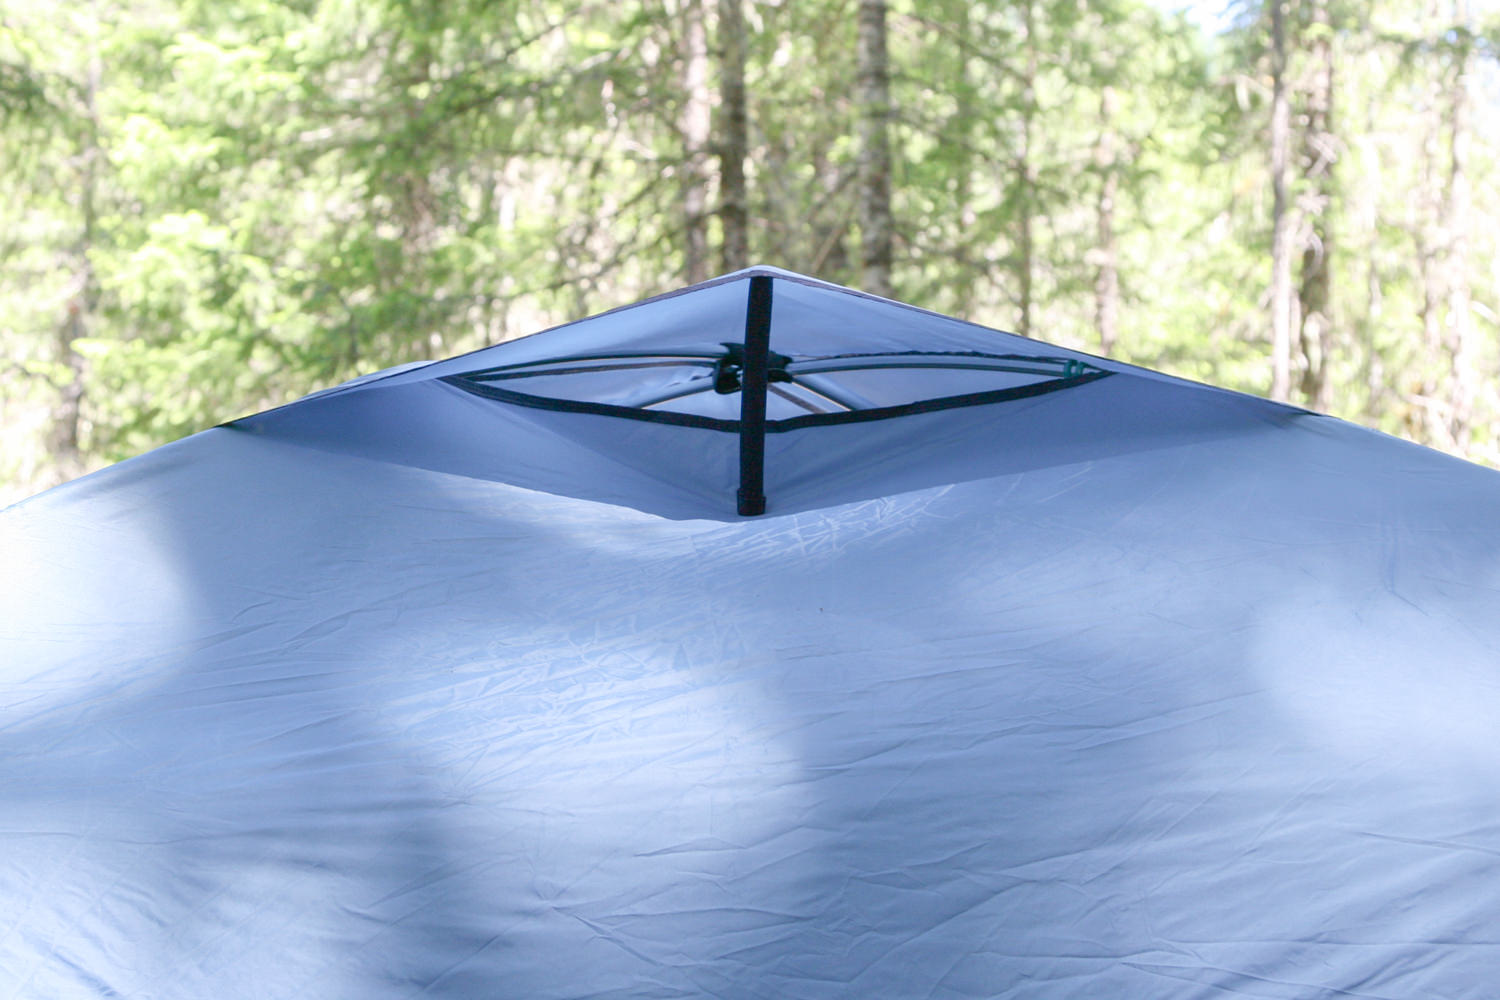 kickstand vents that you can access from the interior of the tent offer good ventilation.